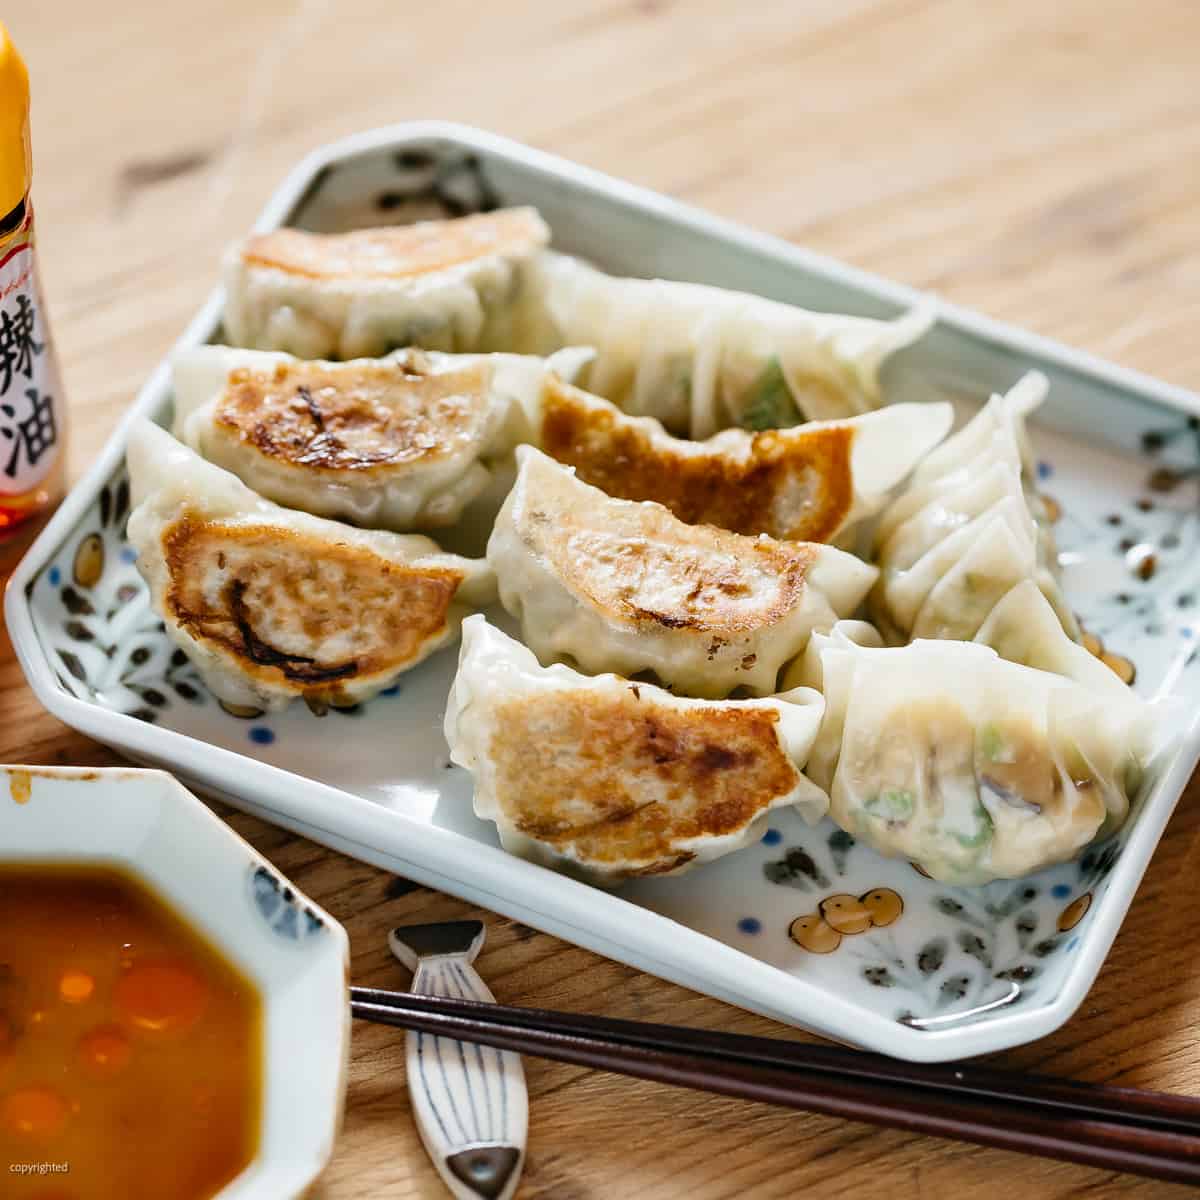 9 vegetable gyoza served on a rectangle plate with a pair of chopsticks